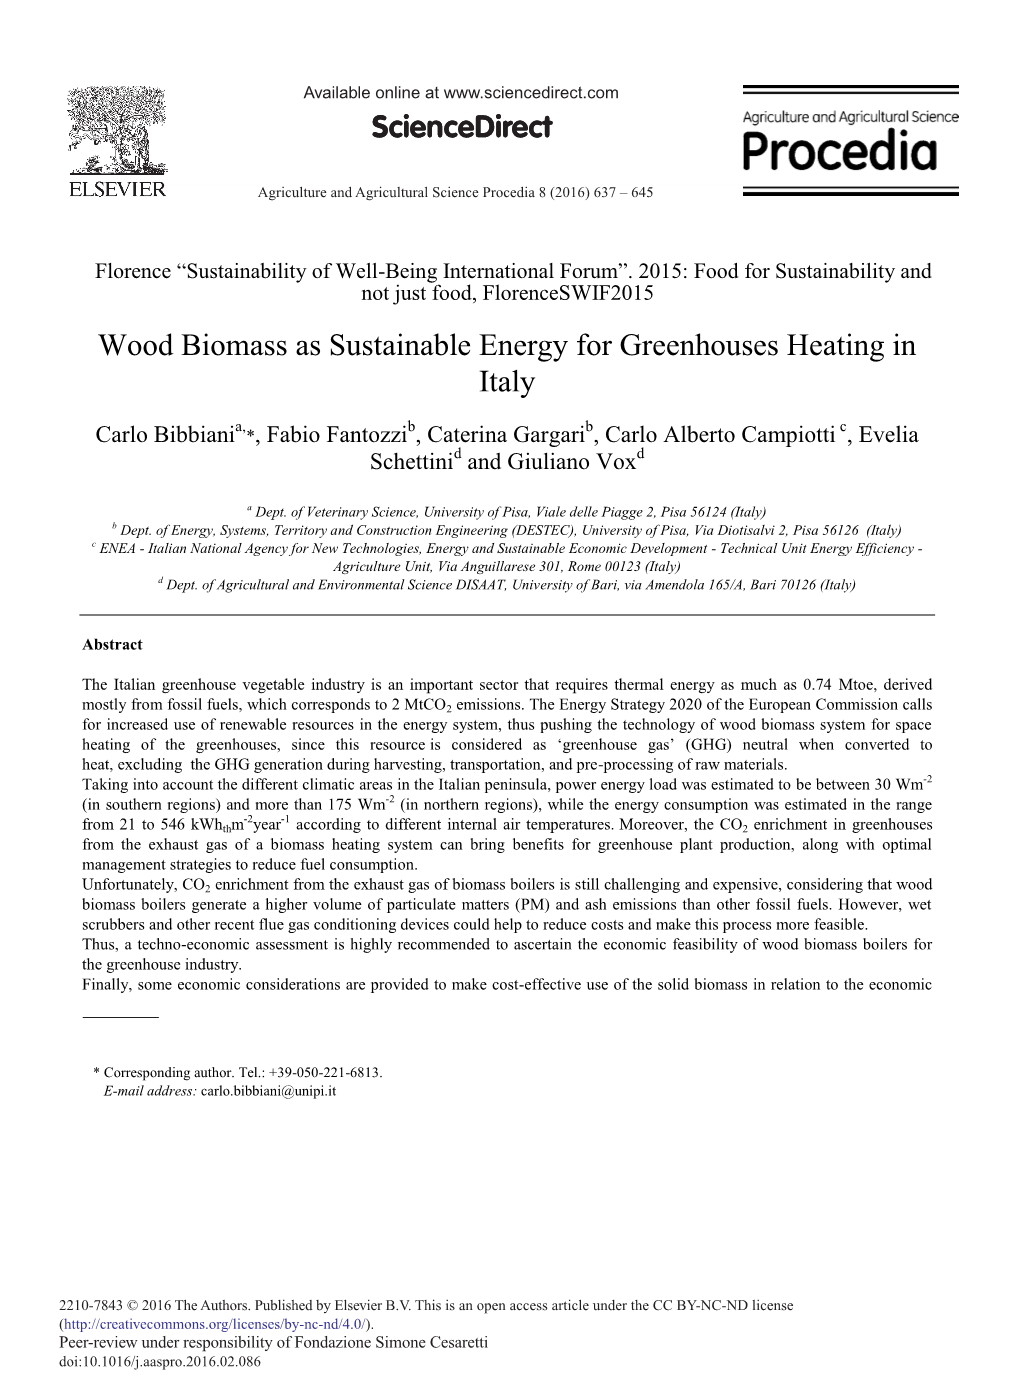 Wood Biomass As Sustainable Energy for Greenhouses Heating in Italy